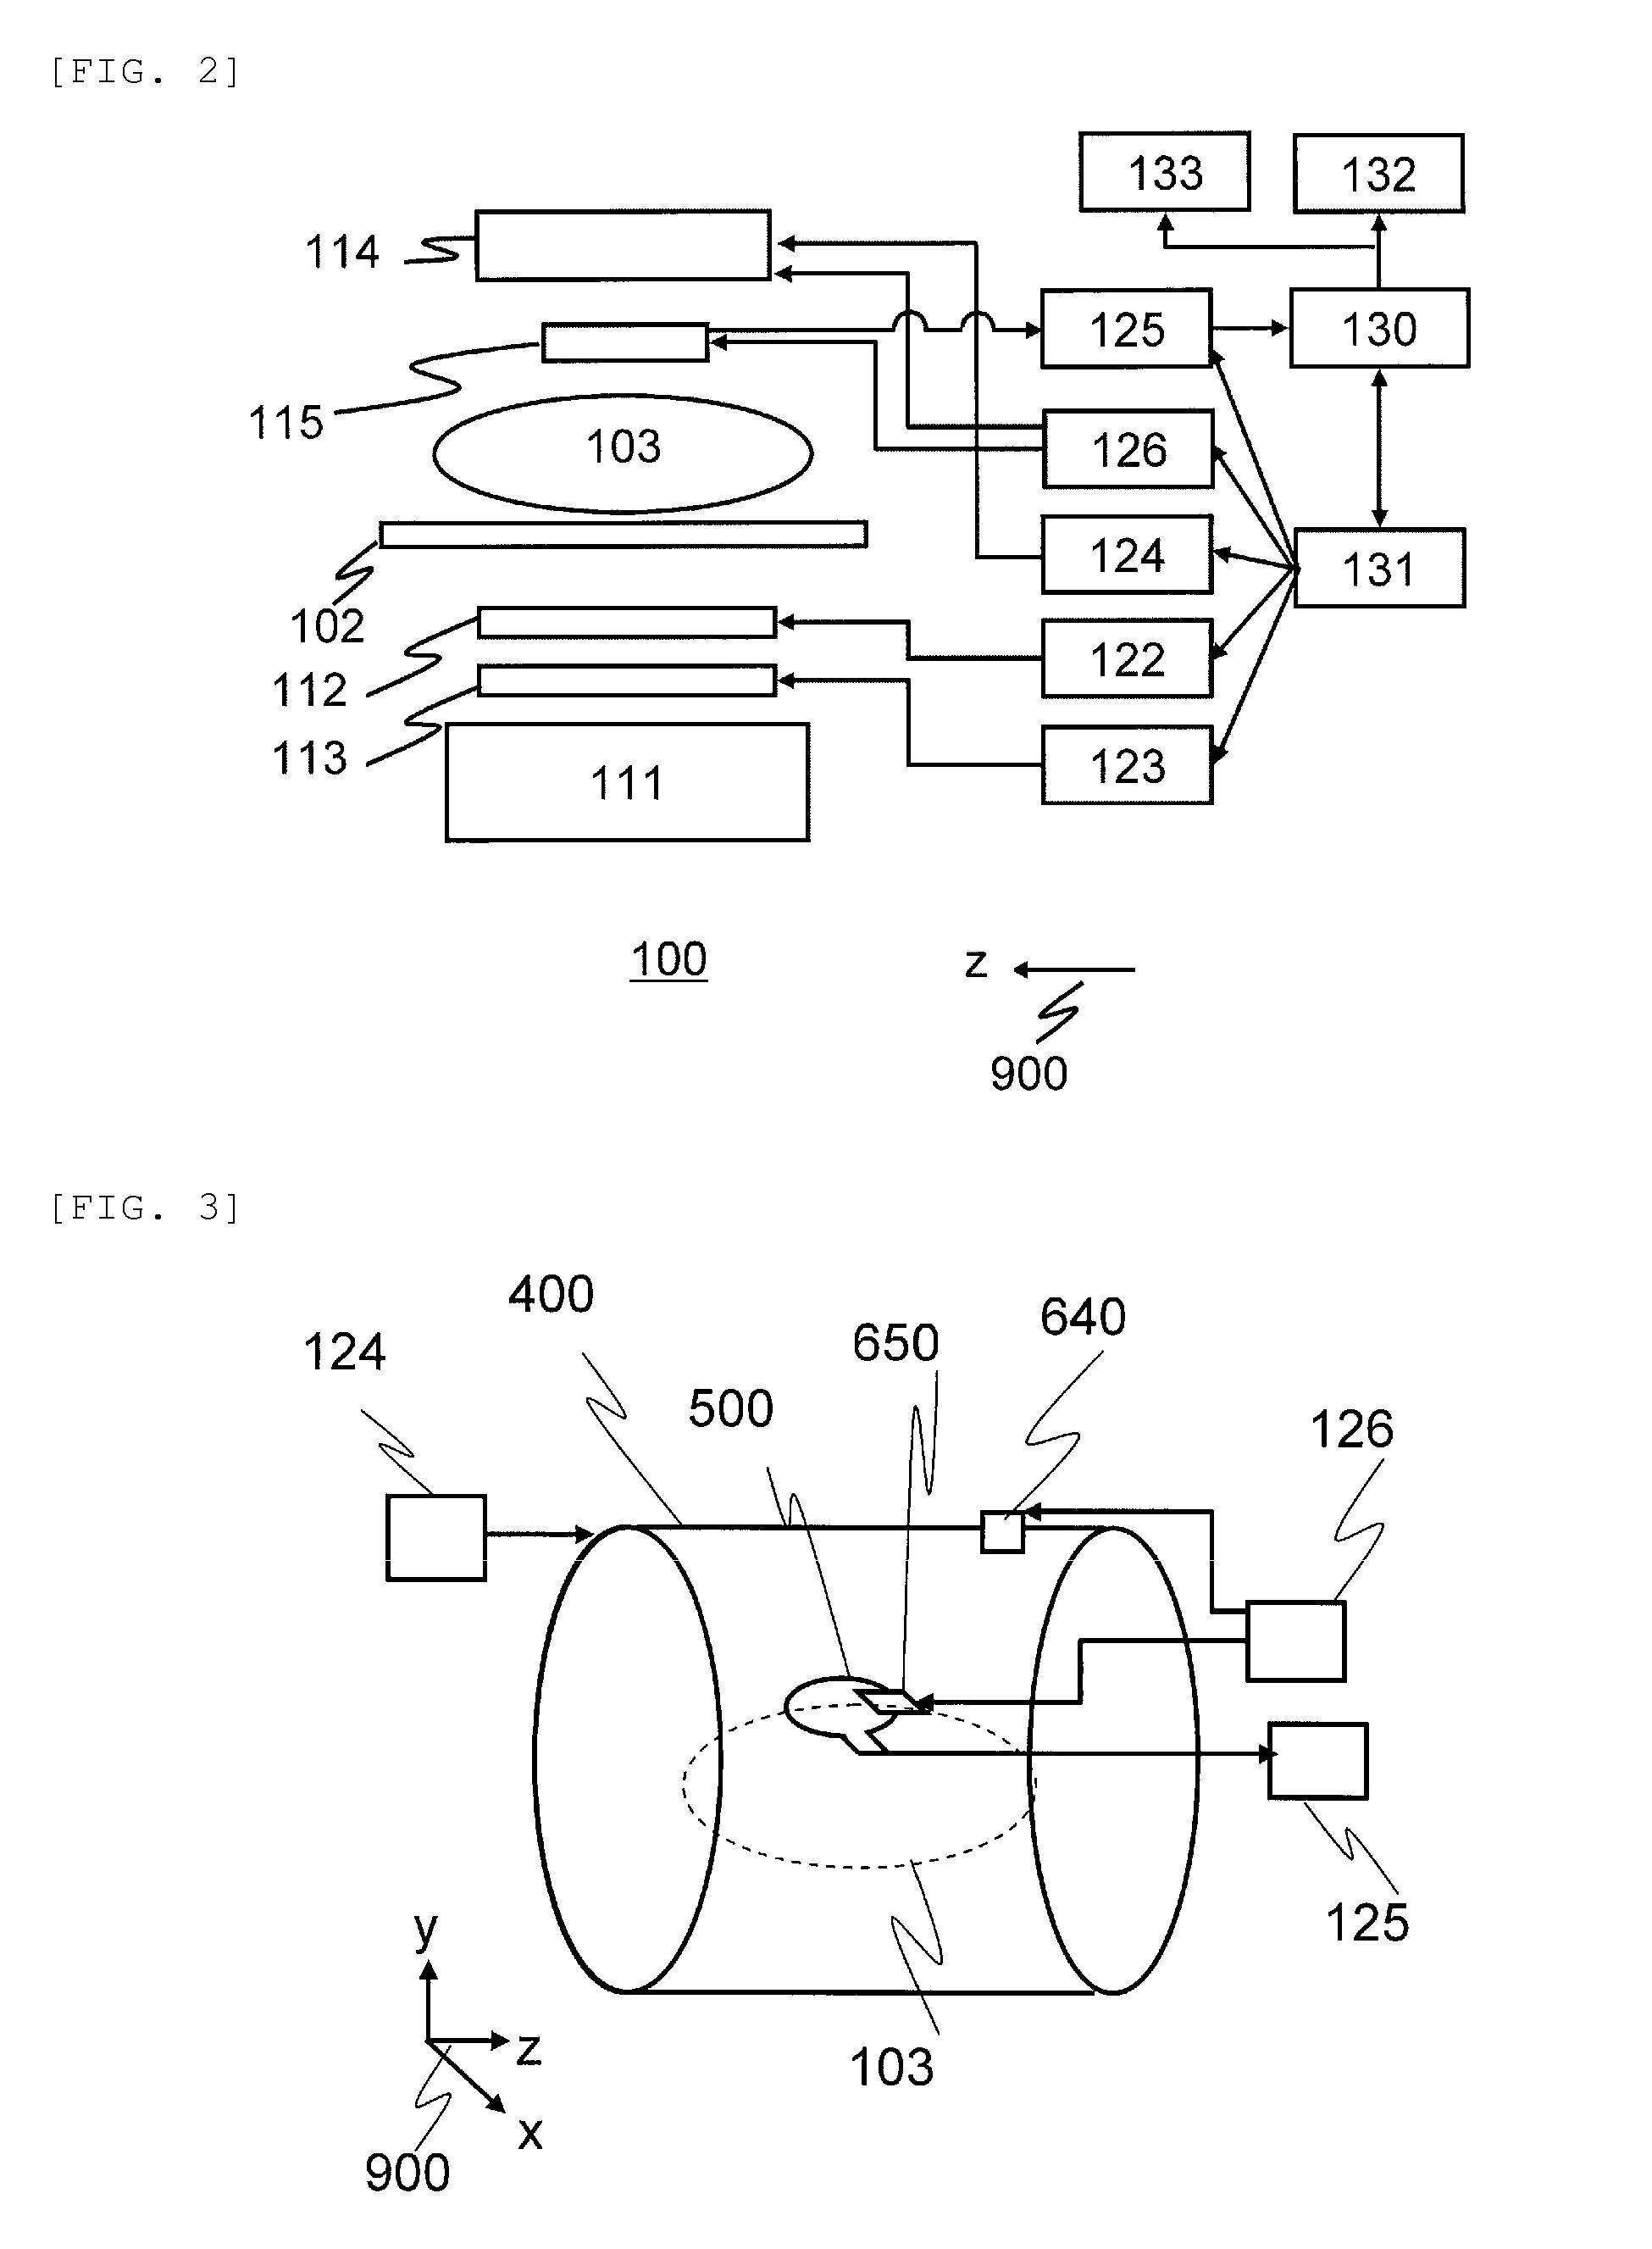 RF coil and magnetic resonance imaging device